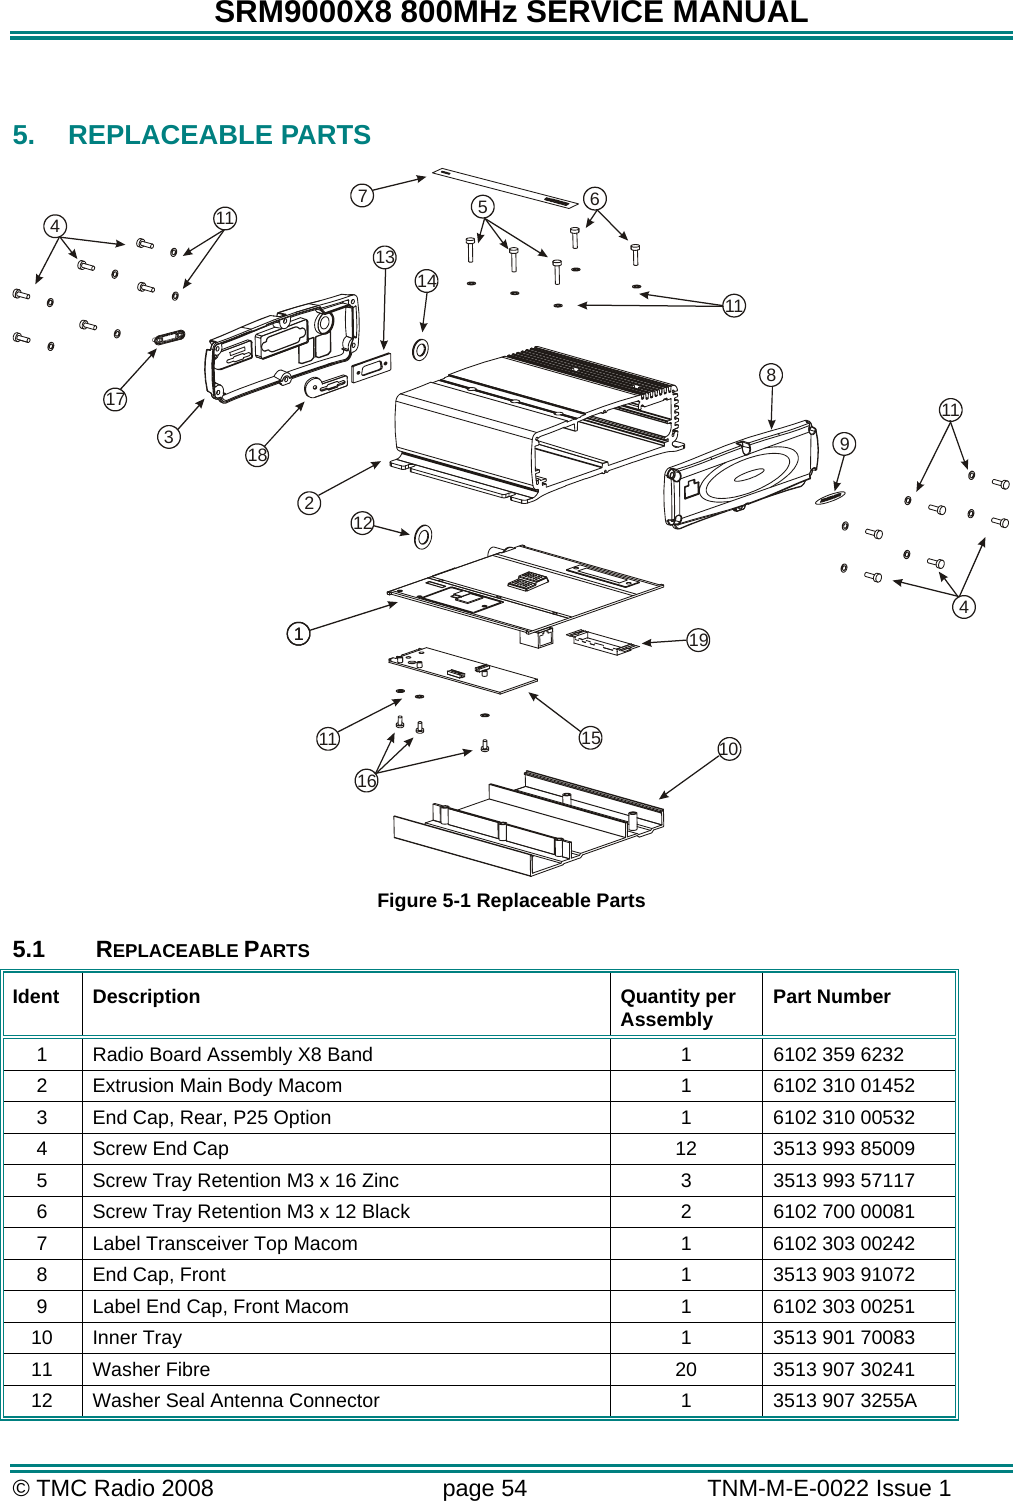 SRM9000X8 800MHz SERVICE MANUAL © TMC Radio 2008  page 54   TNM-M-E-0022 Issue 1   5. REPLACEABLE PARTS 1123445678910111111121413151611181719 Figure 5-1 Replaceable Parts 5.1 REPLACEABLE PARTS Ident Description Quantity per Assembly  Part Number 1  Radio Board Assembly X8 Band  1  6102 359 6232 2  Extrusion Main Body Macom  1  6102 310 01452 3  End Cap, Rear, P25 Option  1  6102 310 00532 4  Screw End Cap  12  3513 993 85009 5  Screw Tray Retention M3 x 16 Zinc  3  3513 993 57117 6  Screw Tray Retention M3 x 12 Black  2  6102 700 00081 7  Label Transceiver Top Macom  1  6102 303 00242 8  End Cap, Front  1  3513 903 91072 9  Label End Cap, Front Macom  1  6102 303 00251 10  Inner Tray  1  3513 901 70083 11 Washer Fibre  20  3513 907 30241 12  Washer Seal Antenna Connector  1  3513 907 3255A 